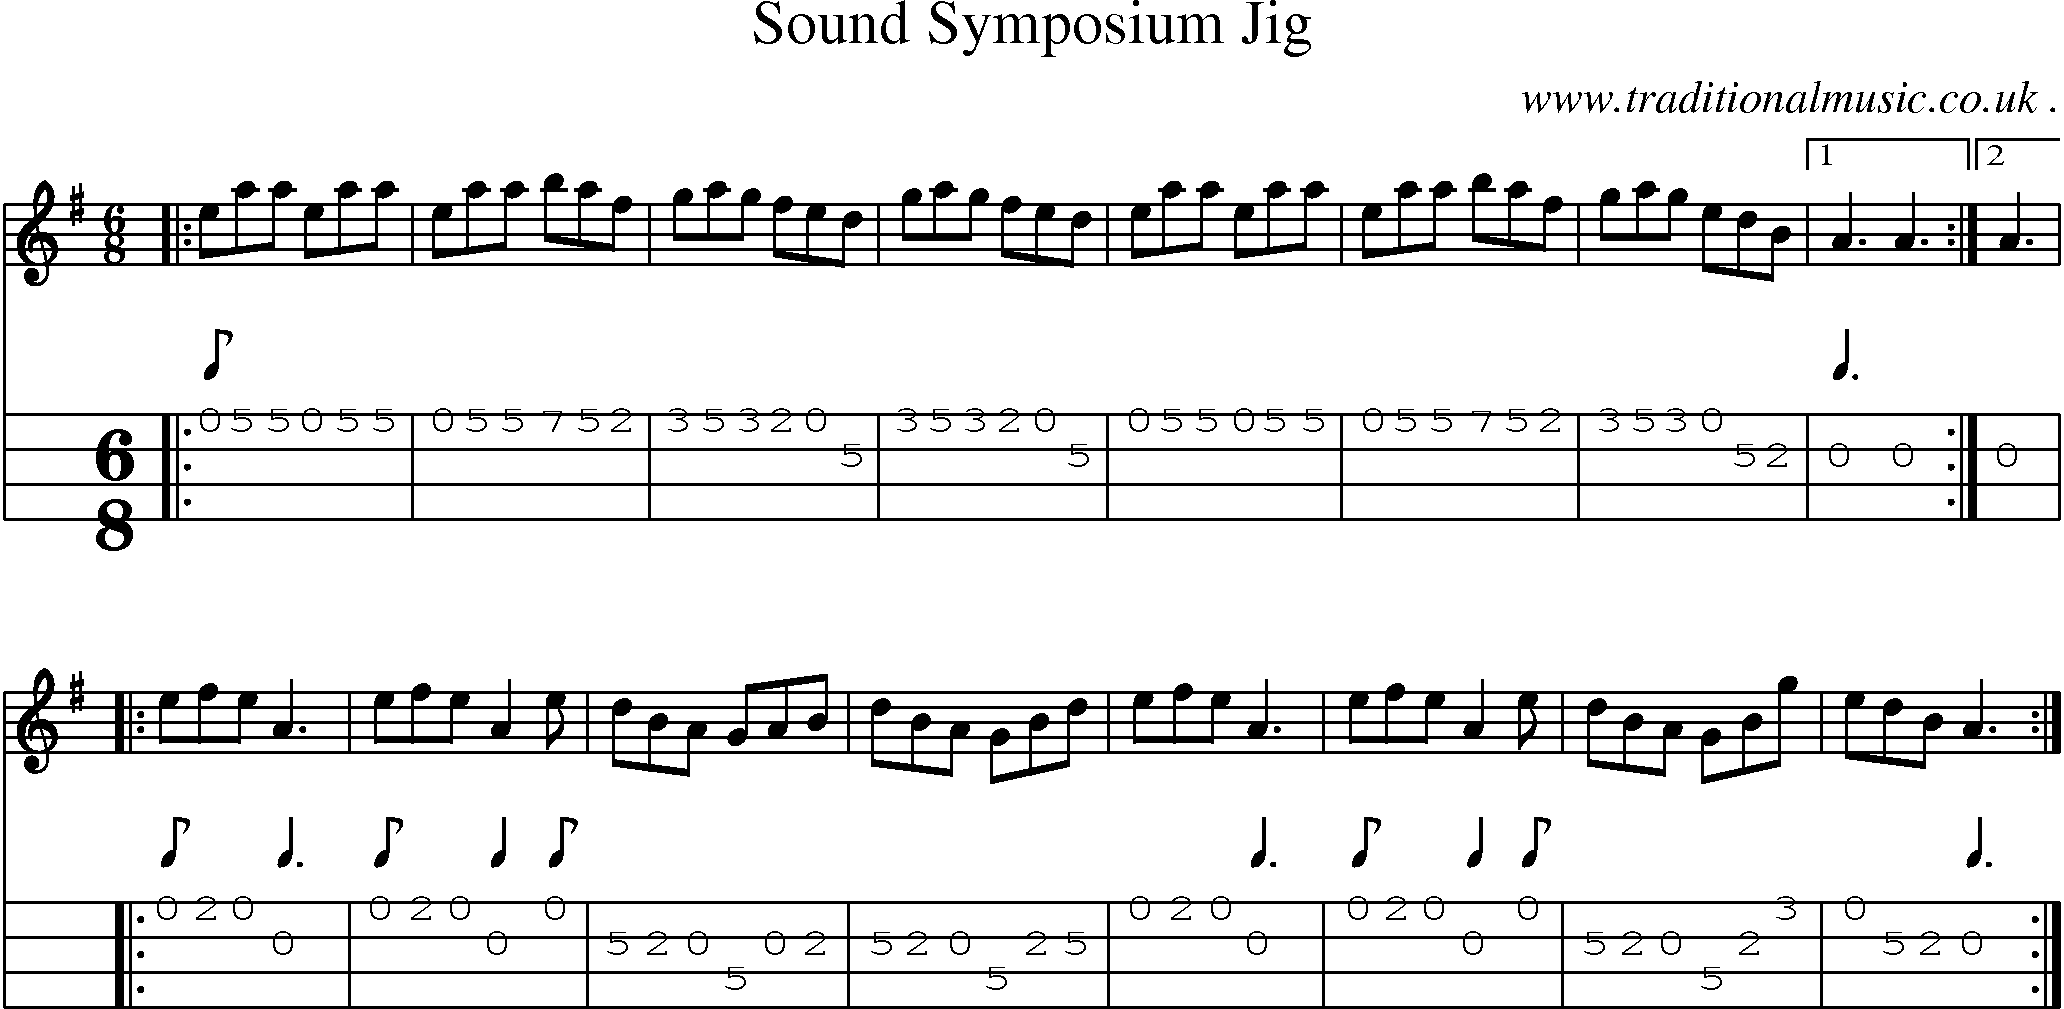 Sheet-Music and Mandolin Tabs for Sound Symposium Jig